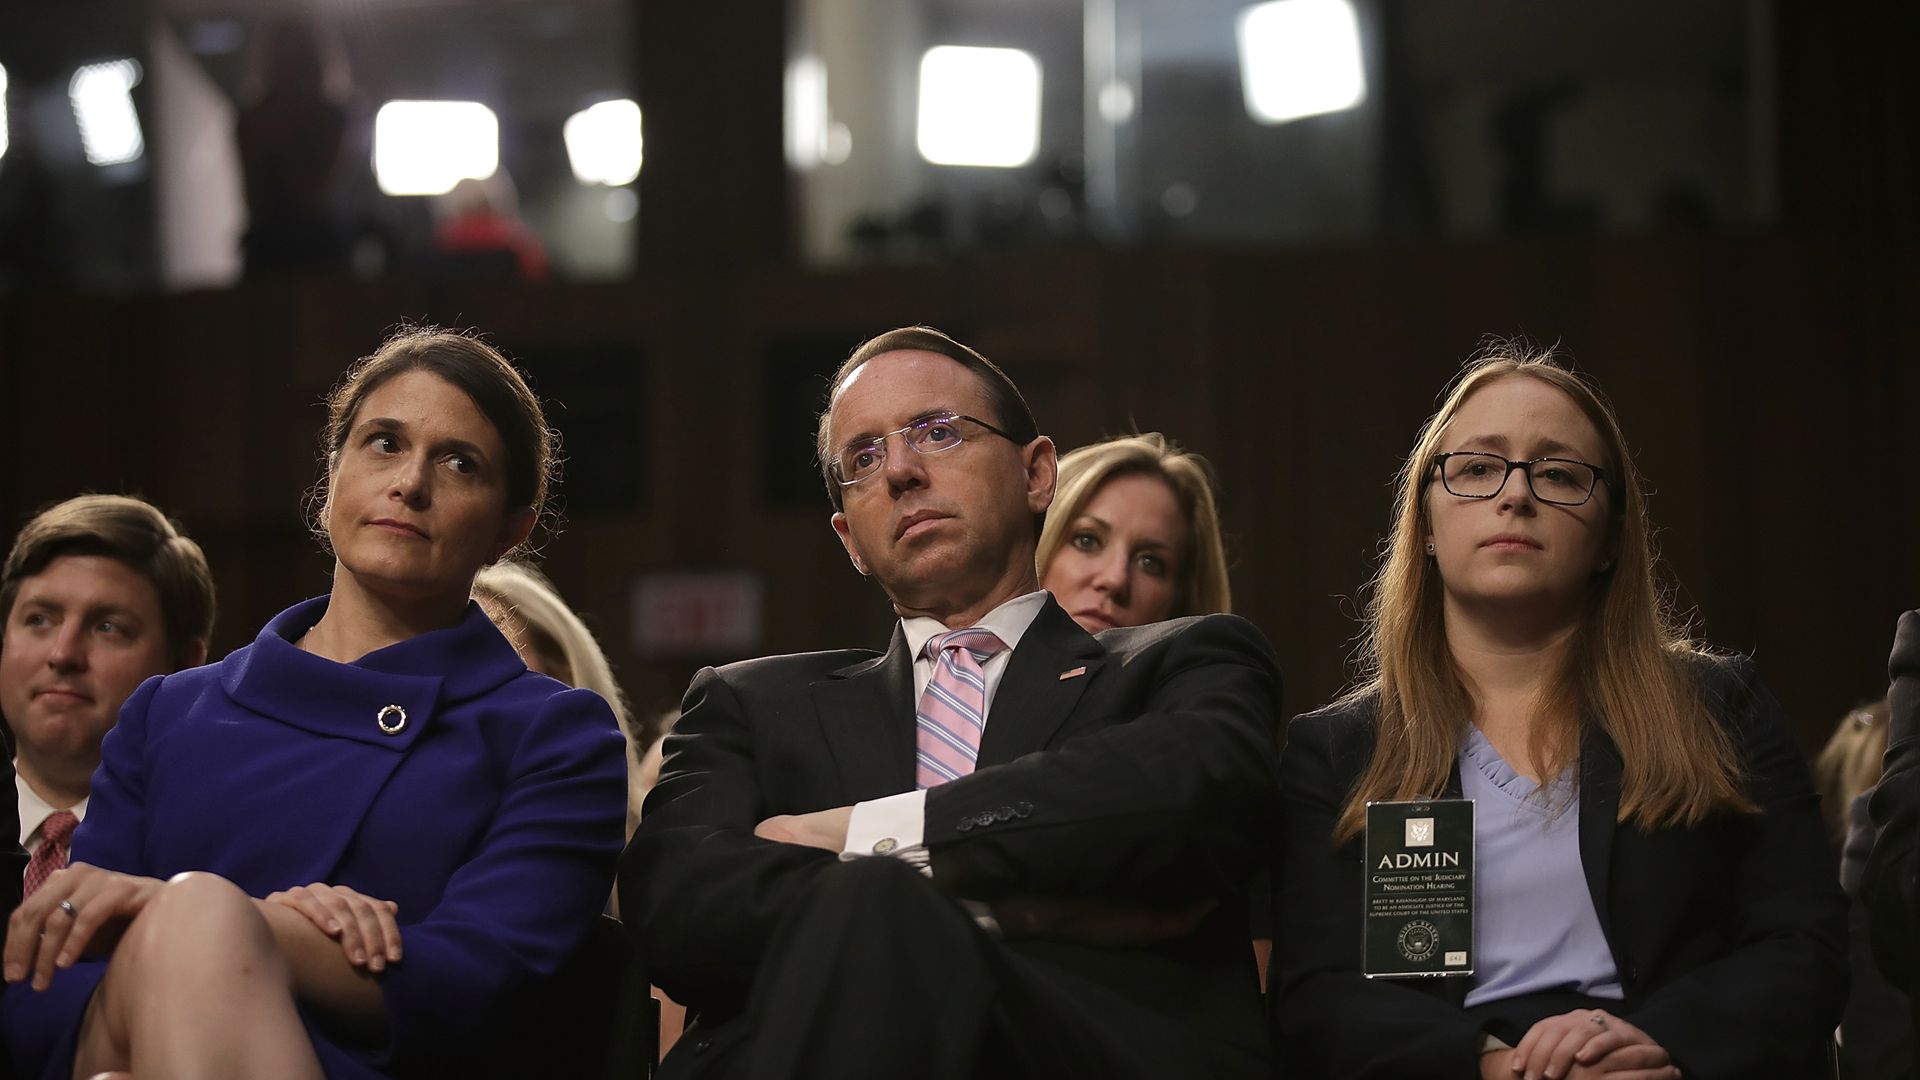 Deputy Attorney General Rod Rosenstein sitting in a hearing with his arms crossed leaning backwards. 